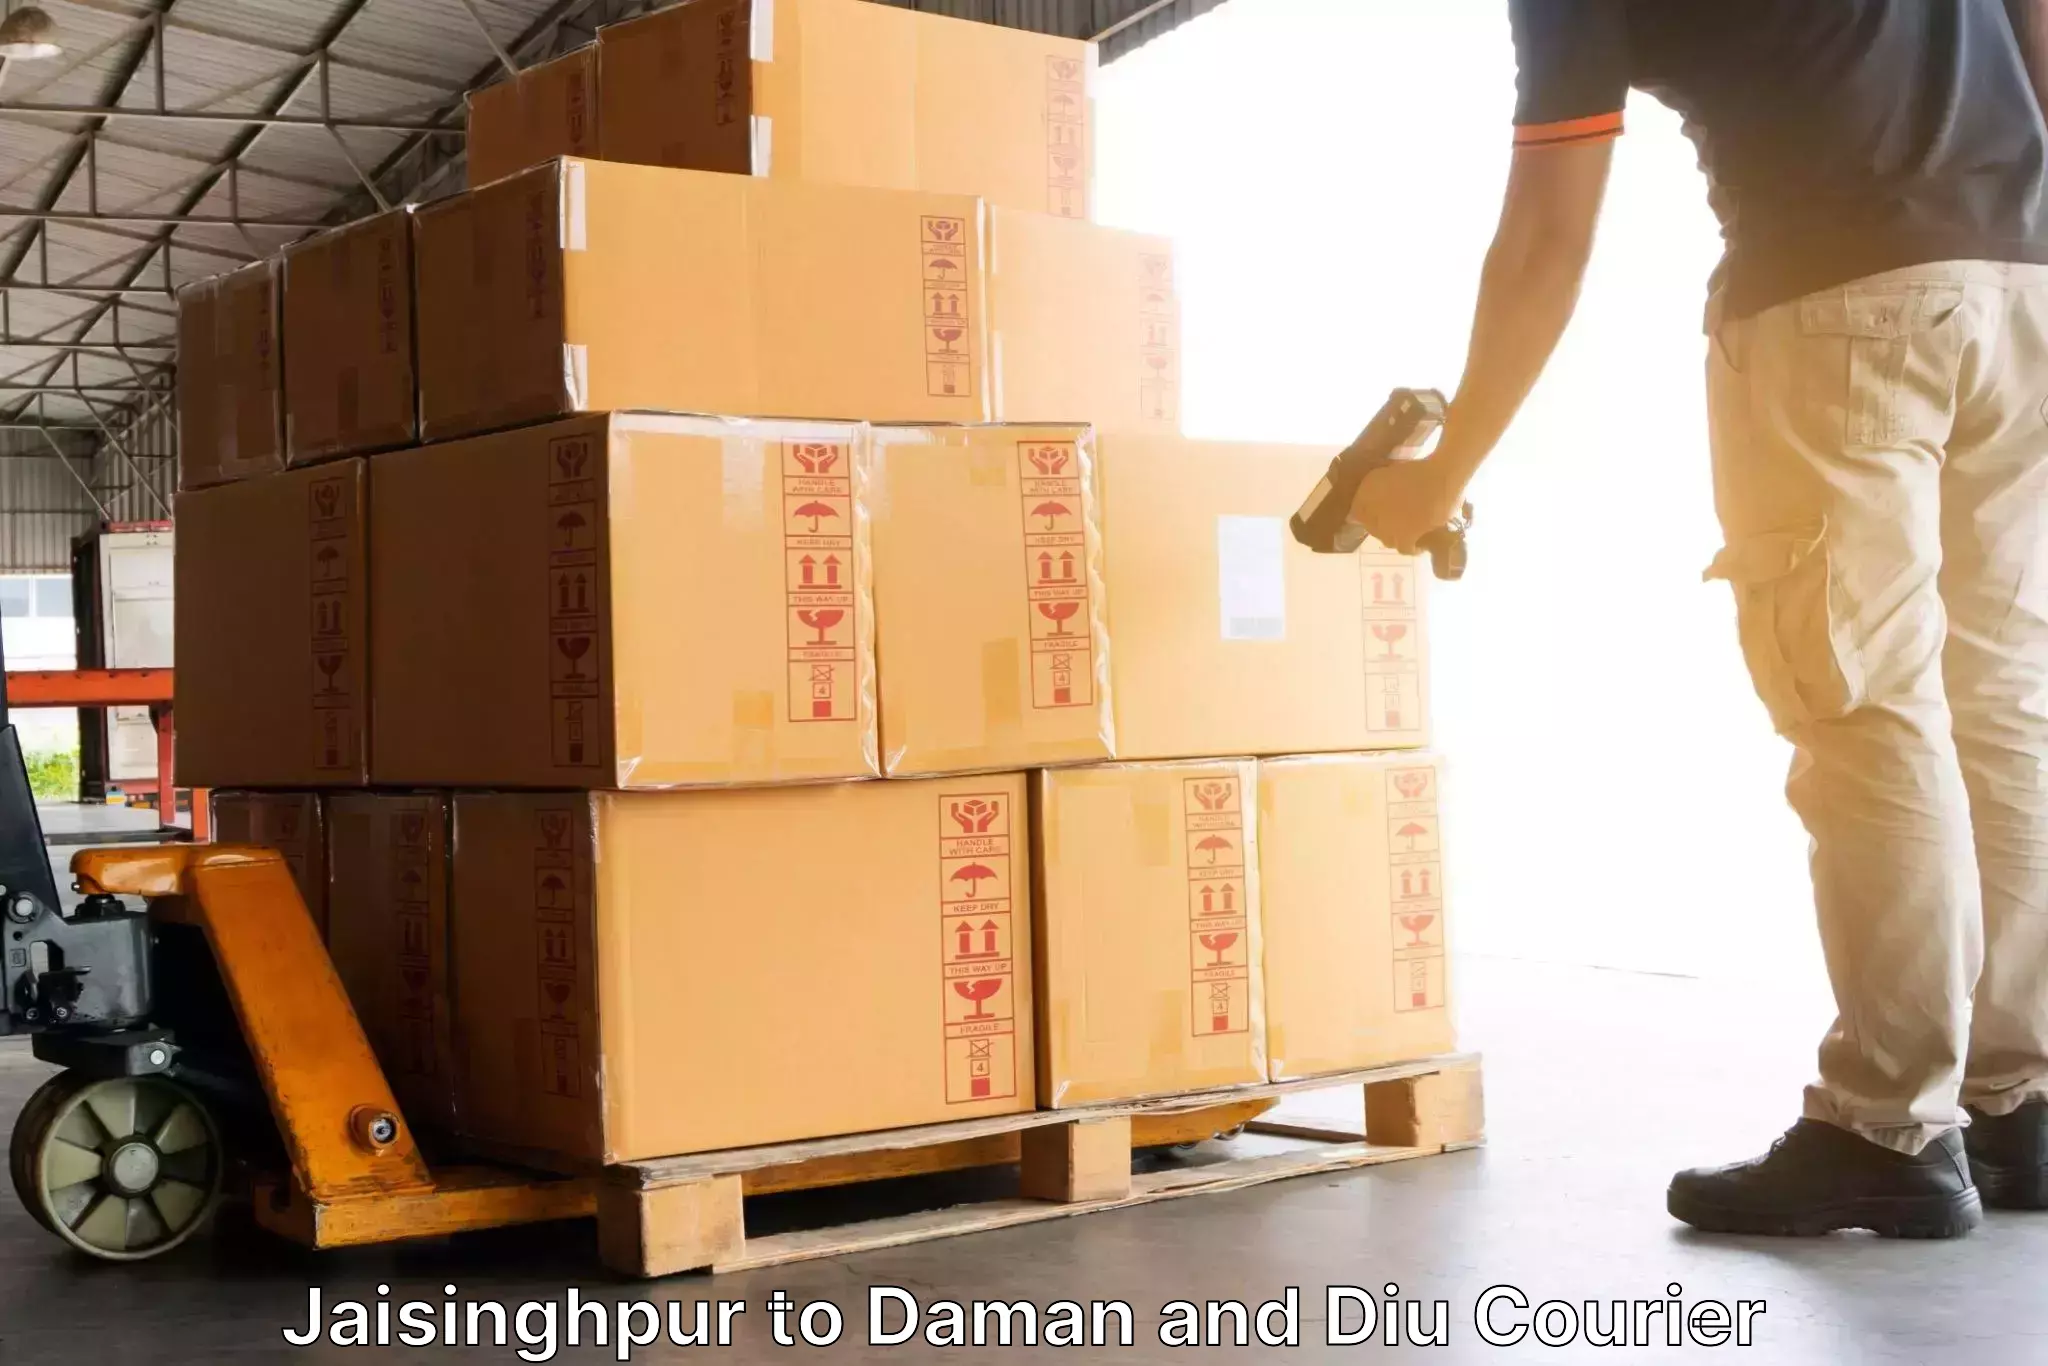 Advanced package delivery in Jaisinghpur to Diu